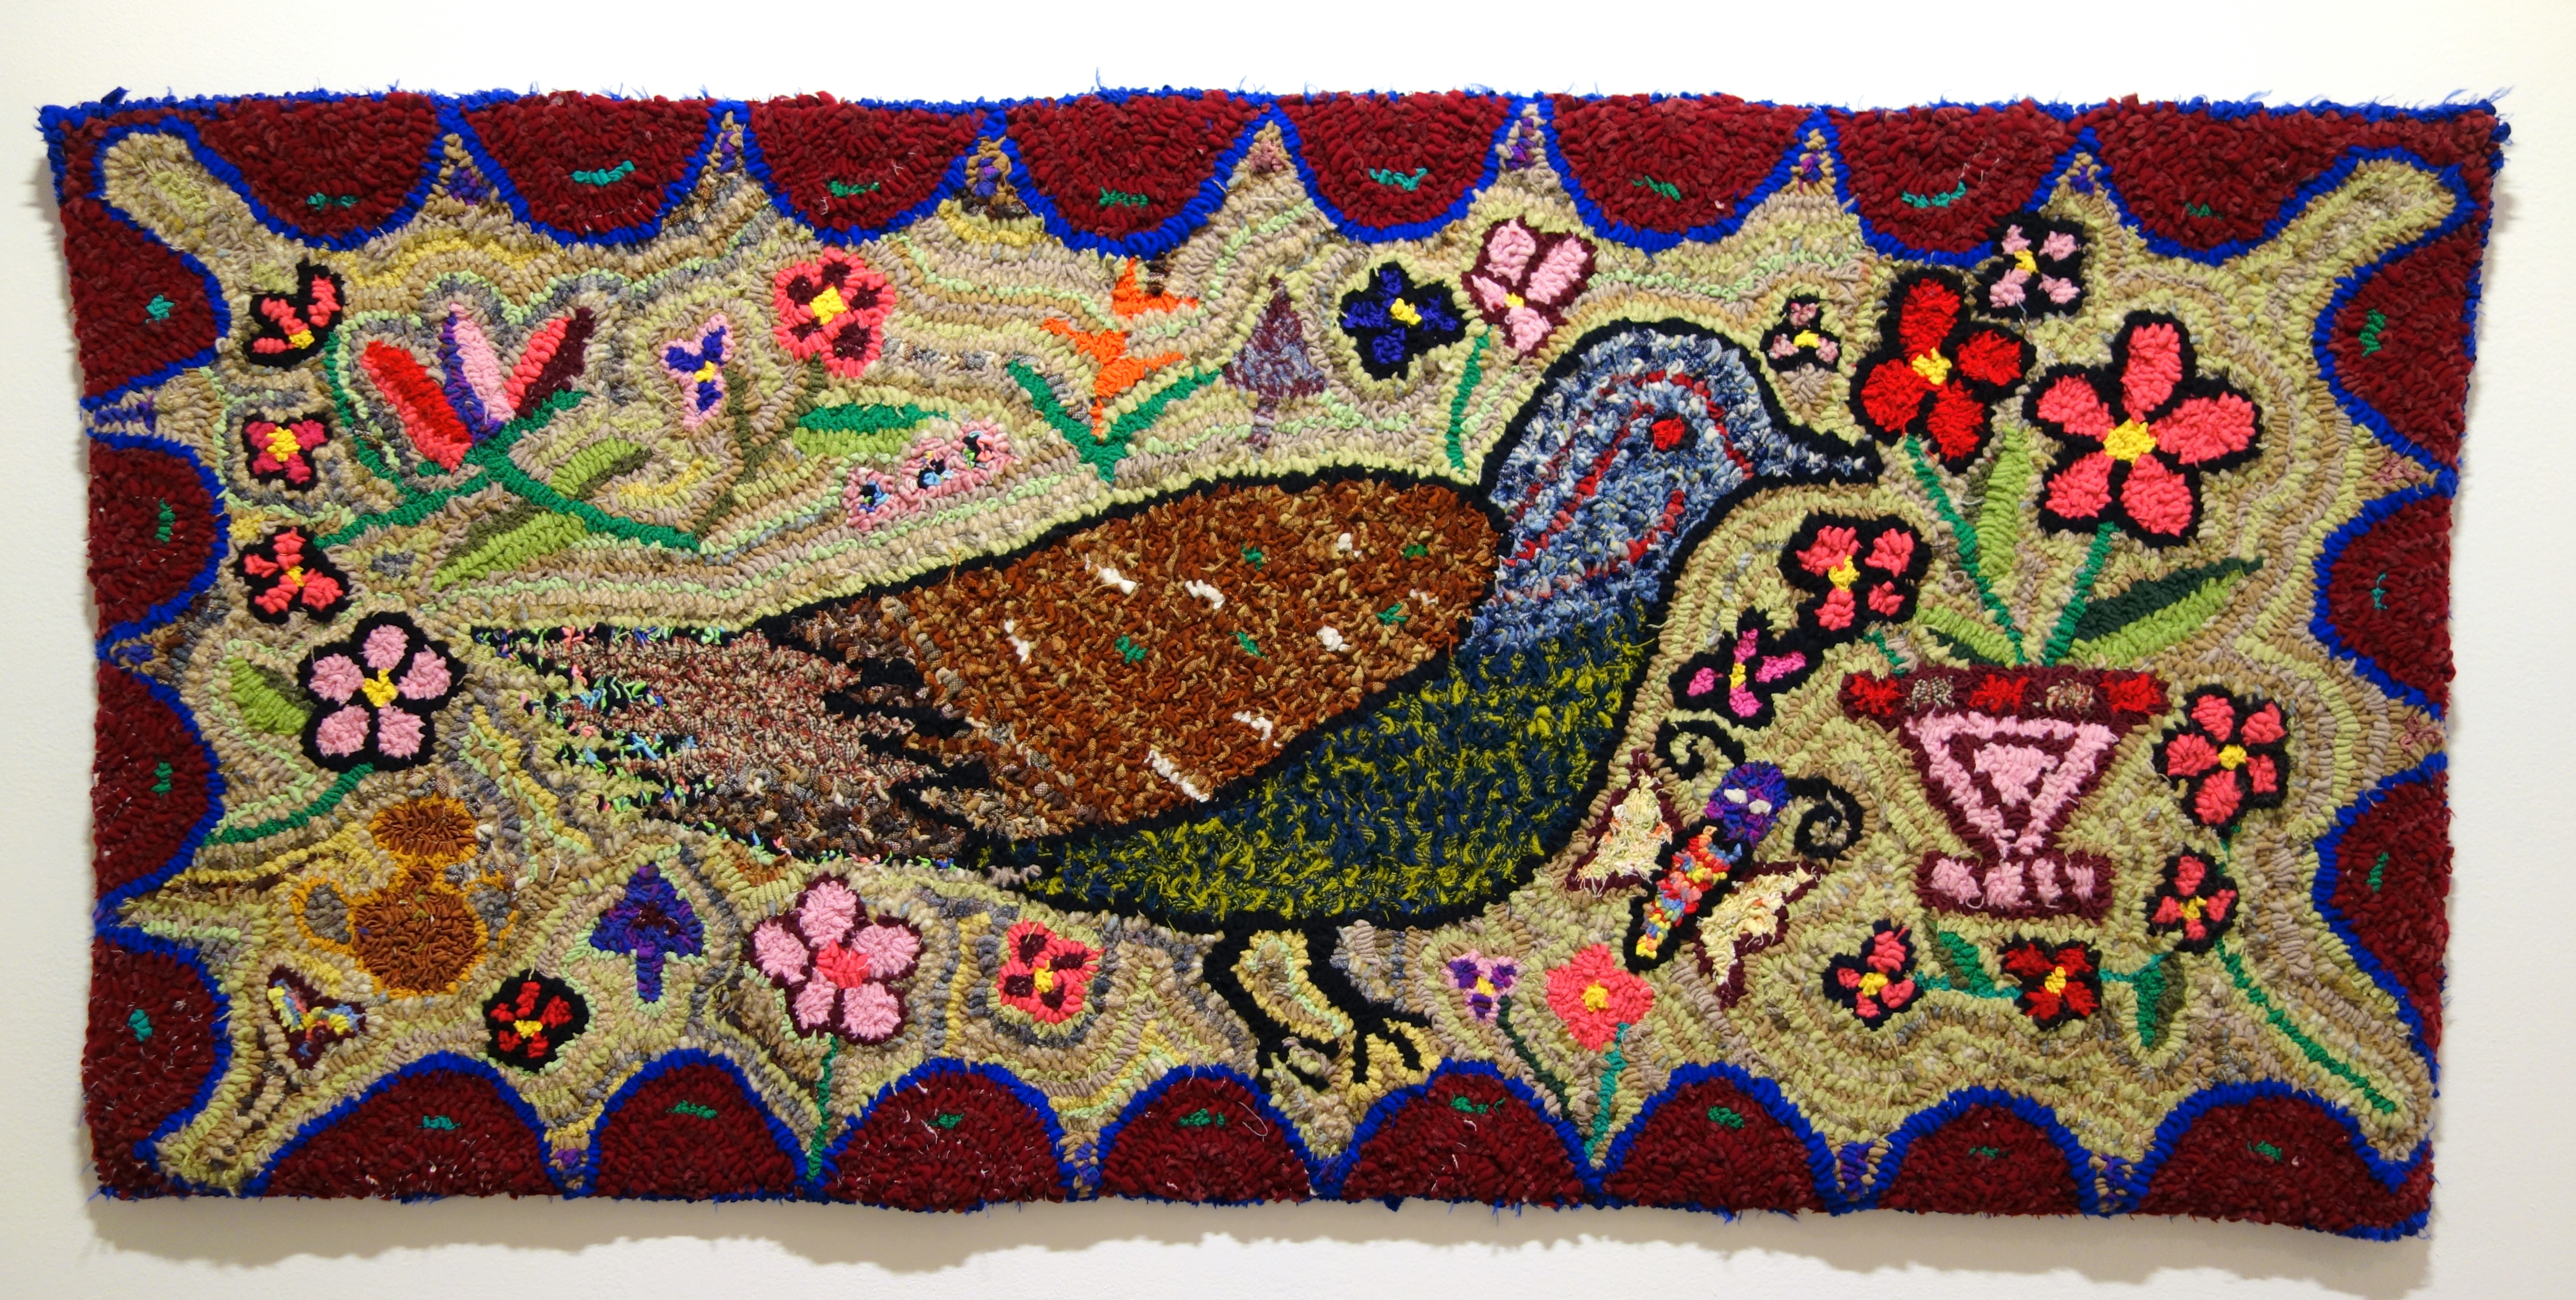 hooked rugs file:hooked rug, maya, 2011 - textile museum of canada - dsc01450. JJPSAND